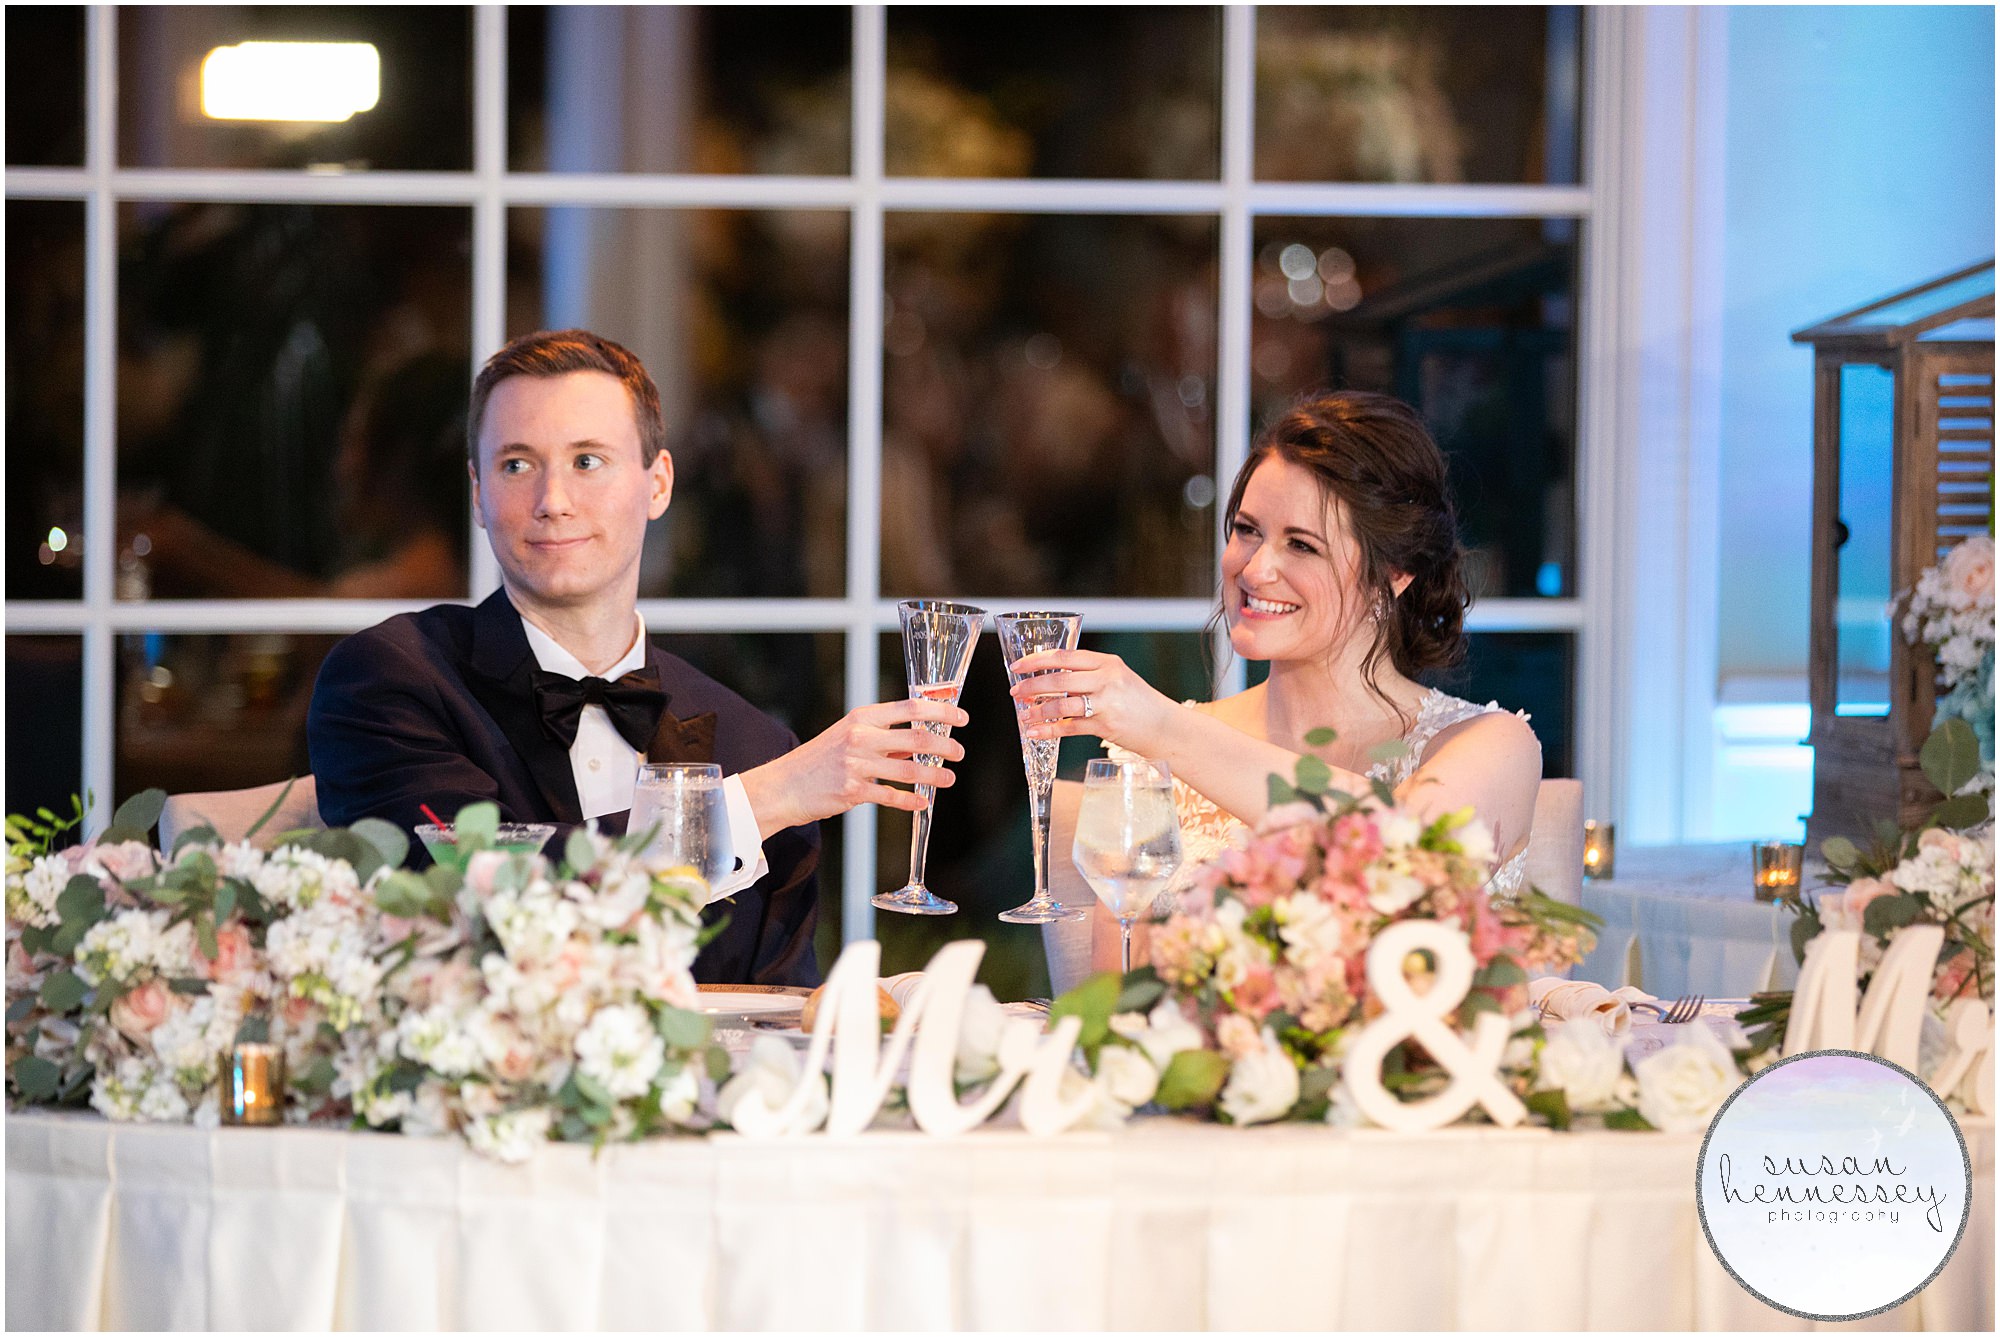 Bride and groom toast at their reception.